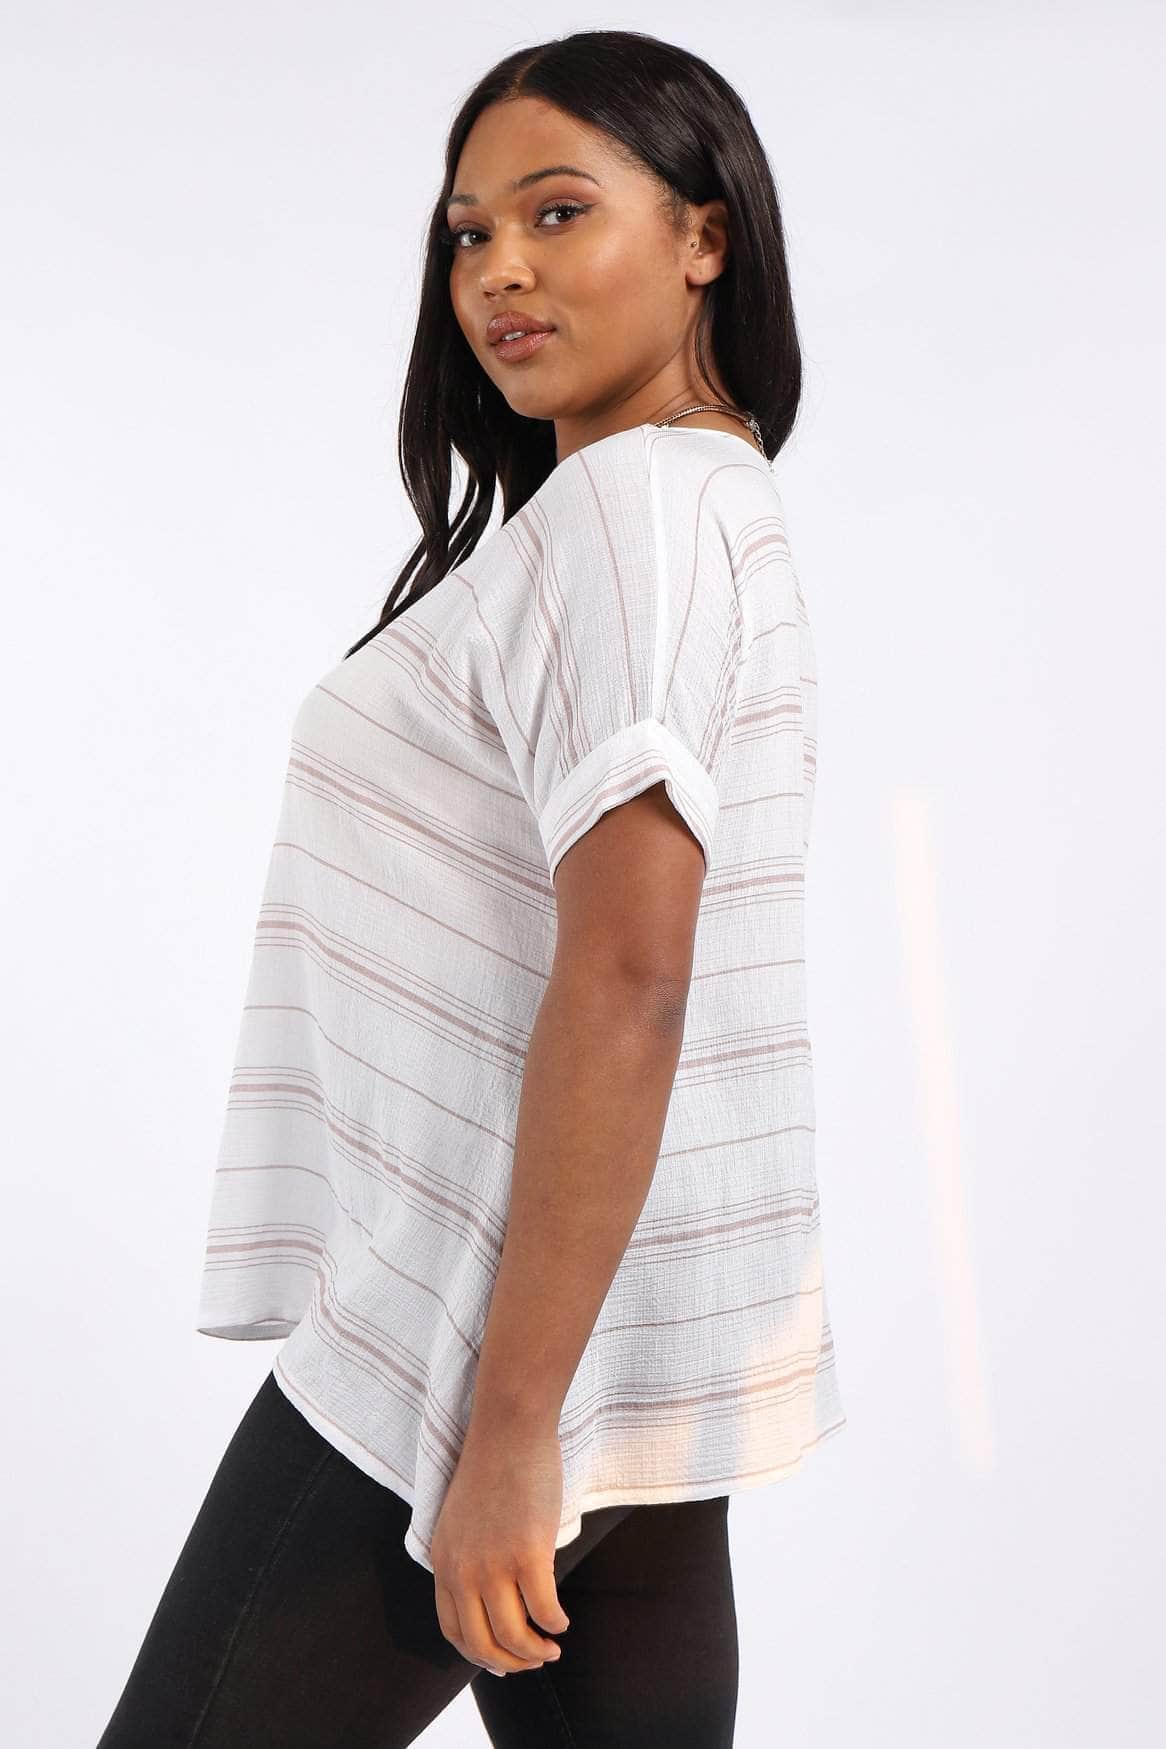 Saloos Top Linen-Look A-Line Top with Necklace